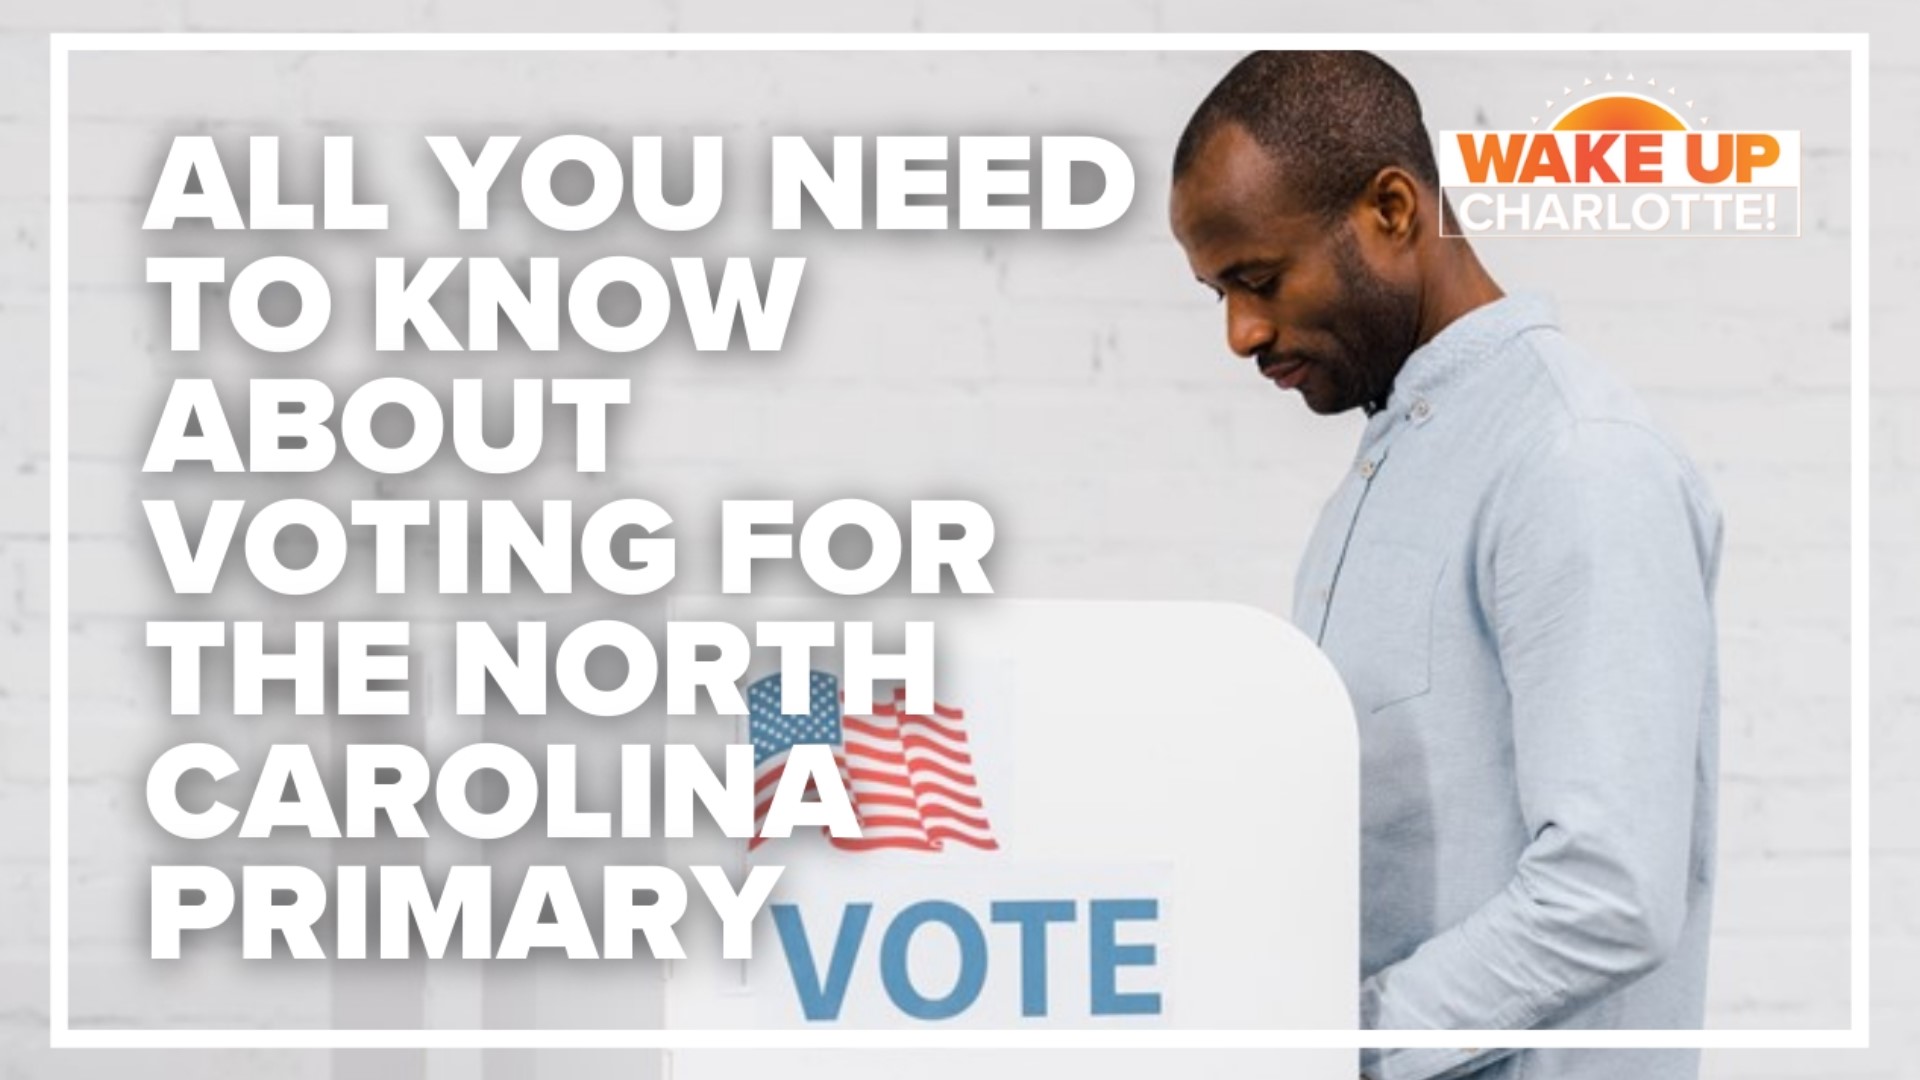 Next week on April 28, you can start heading to the polls for early voting.